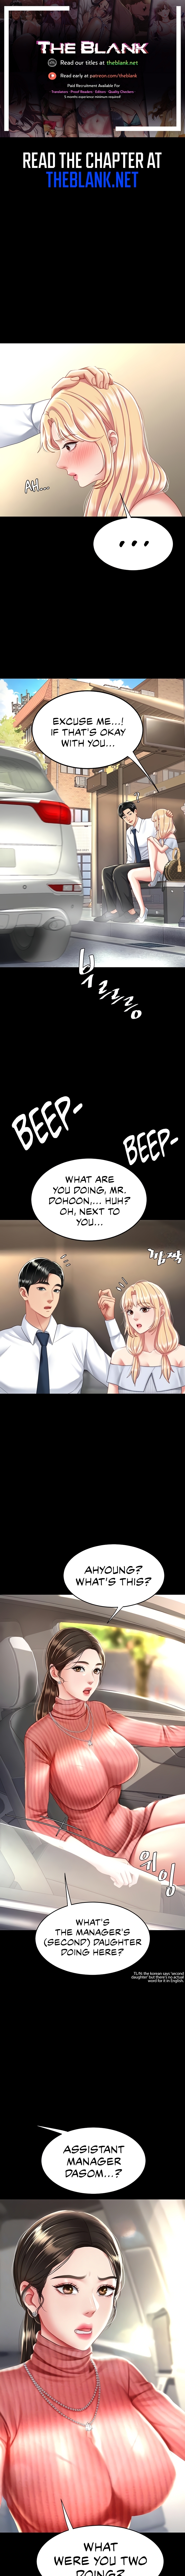 Read manhwa I’ll Eat Your Mom First Chapter 27 - SauceManhwa.com